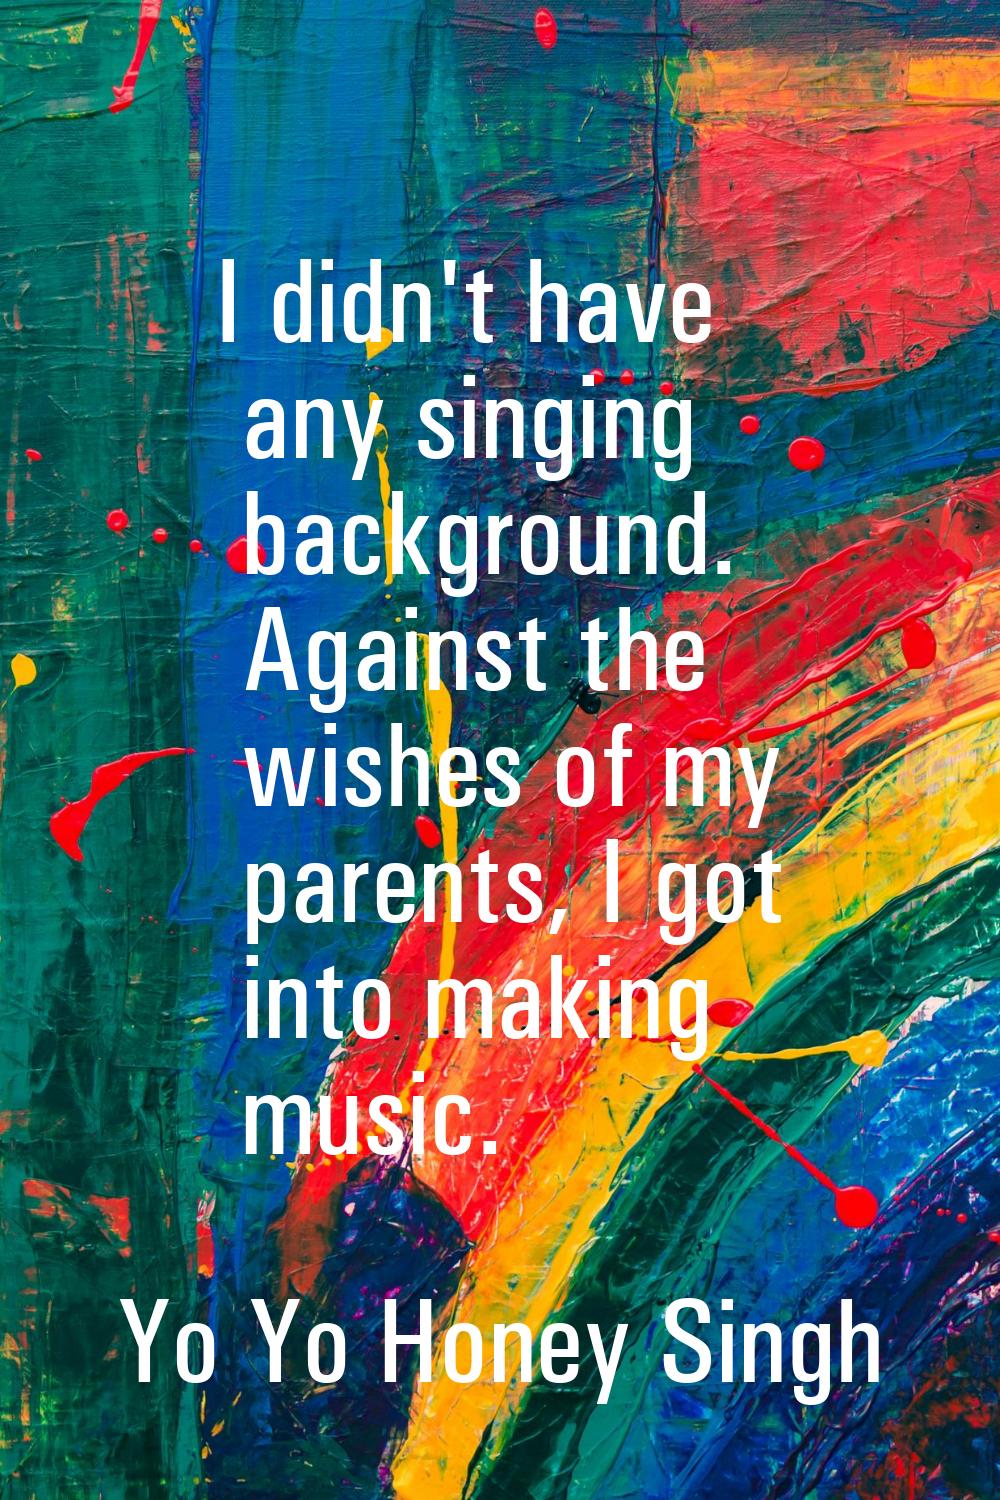 I didn't have any singing background. Against the wishes of my parents, I got into making music.